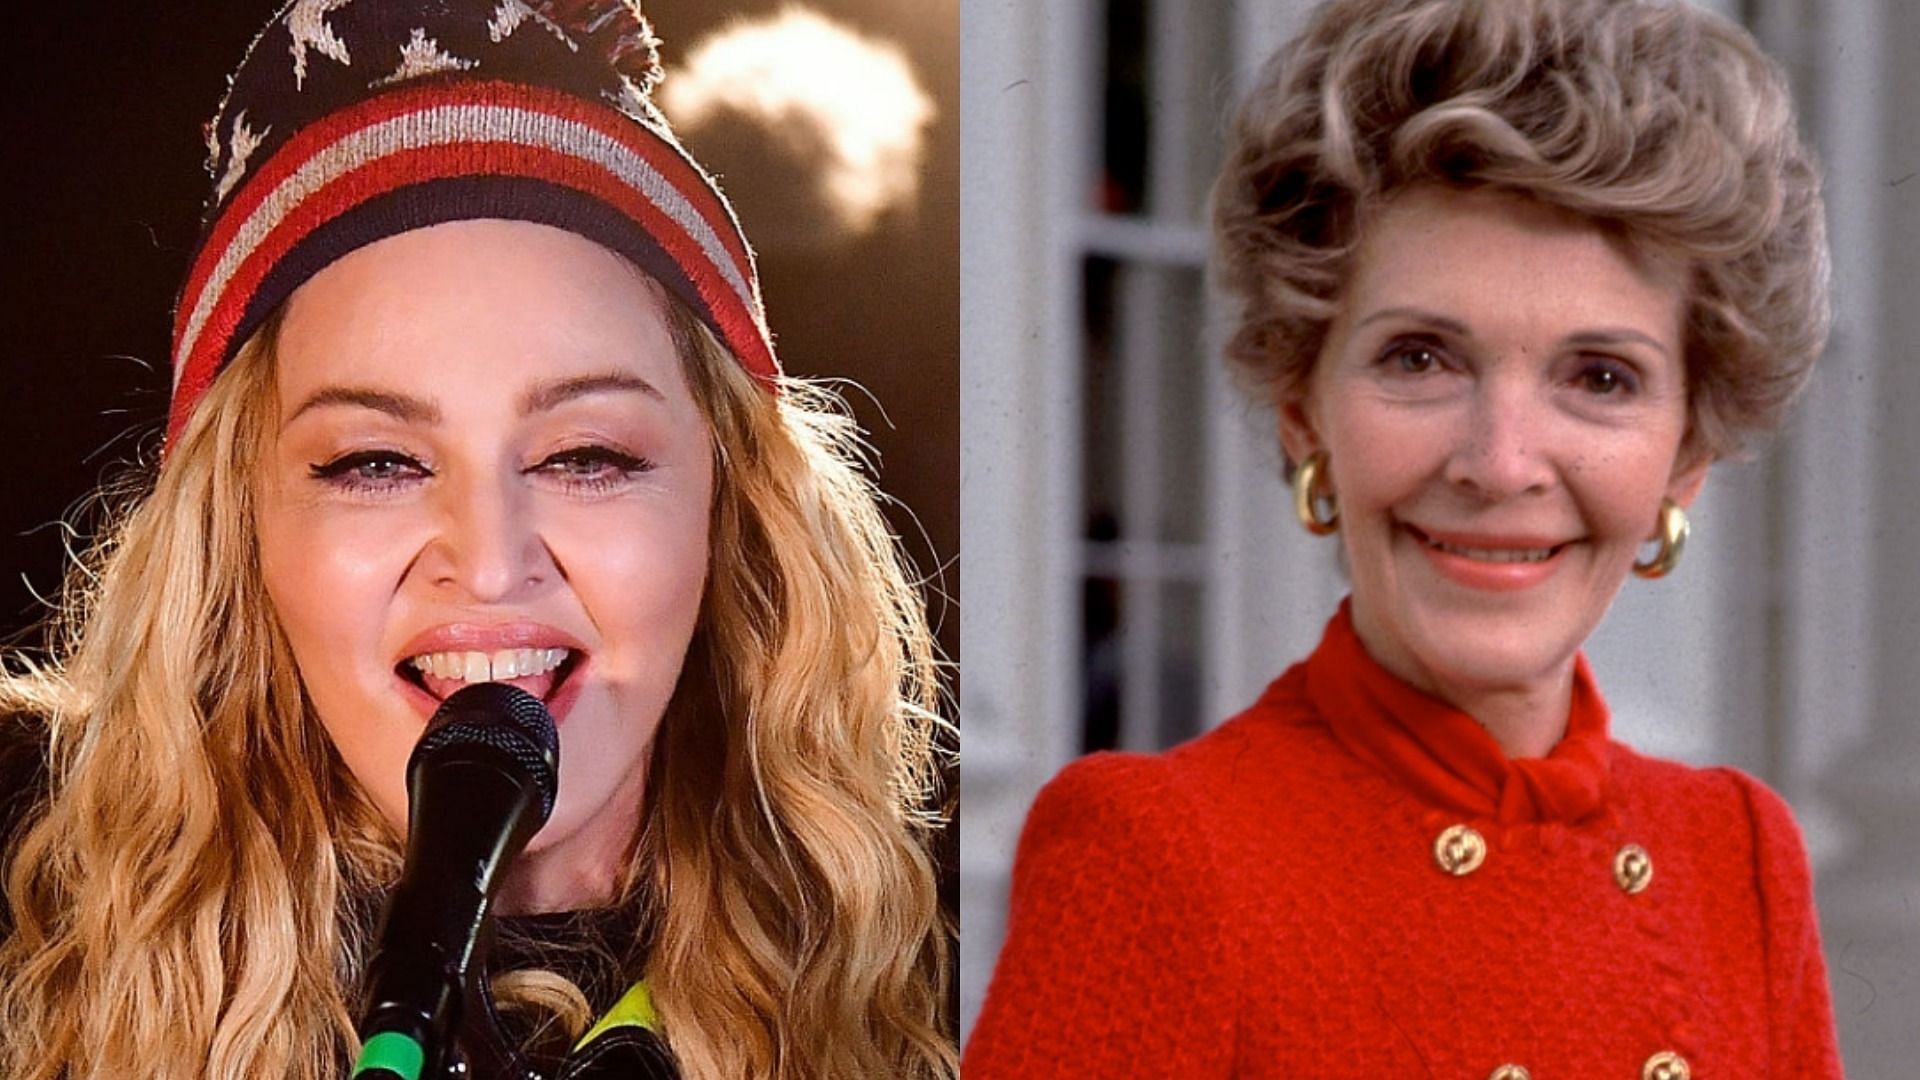 Classically Abby recently compared Madonna and Nancy Reagan on Twitter (Image via James Devaney/Getty Images and Dirck Halstead/Getty Images)